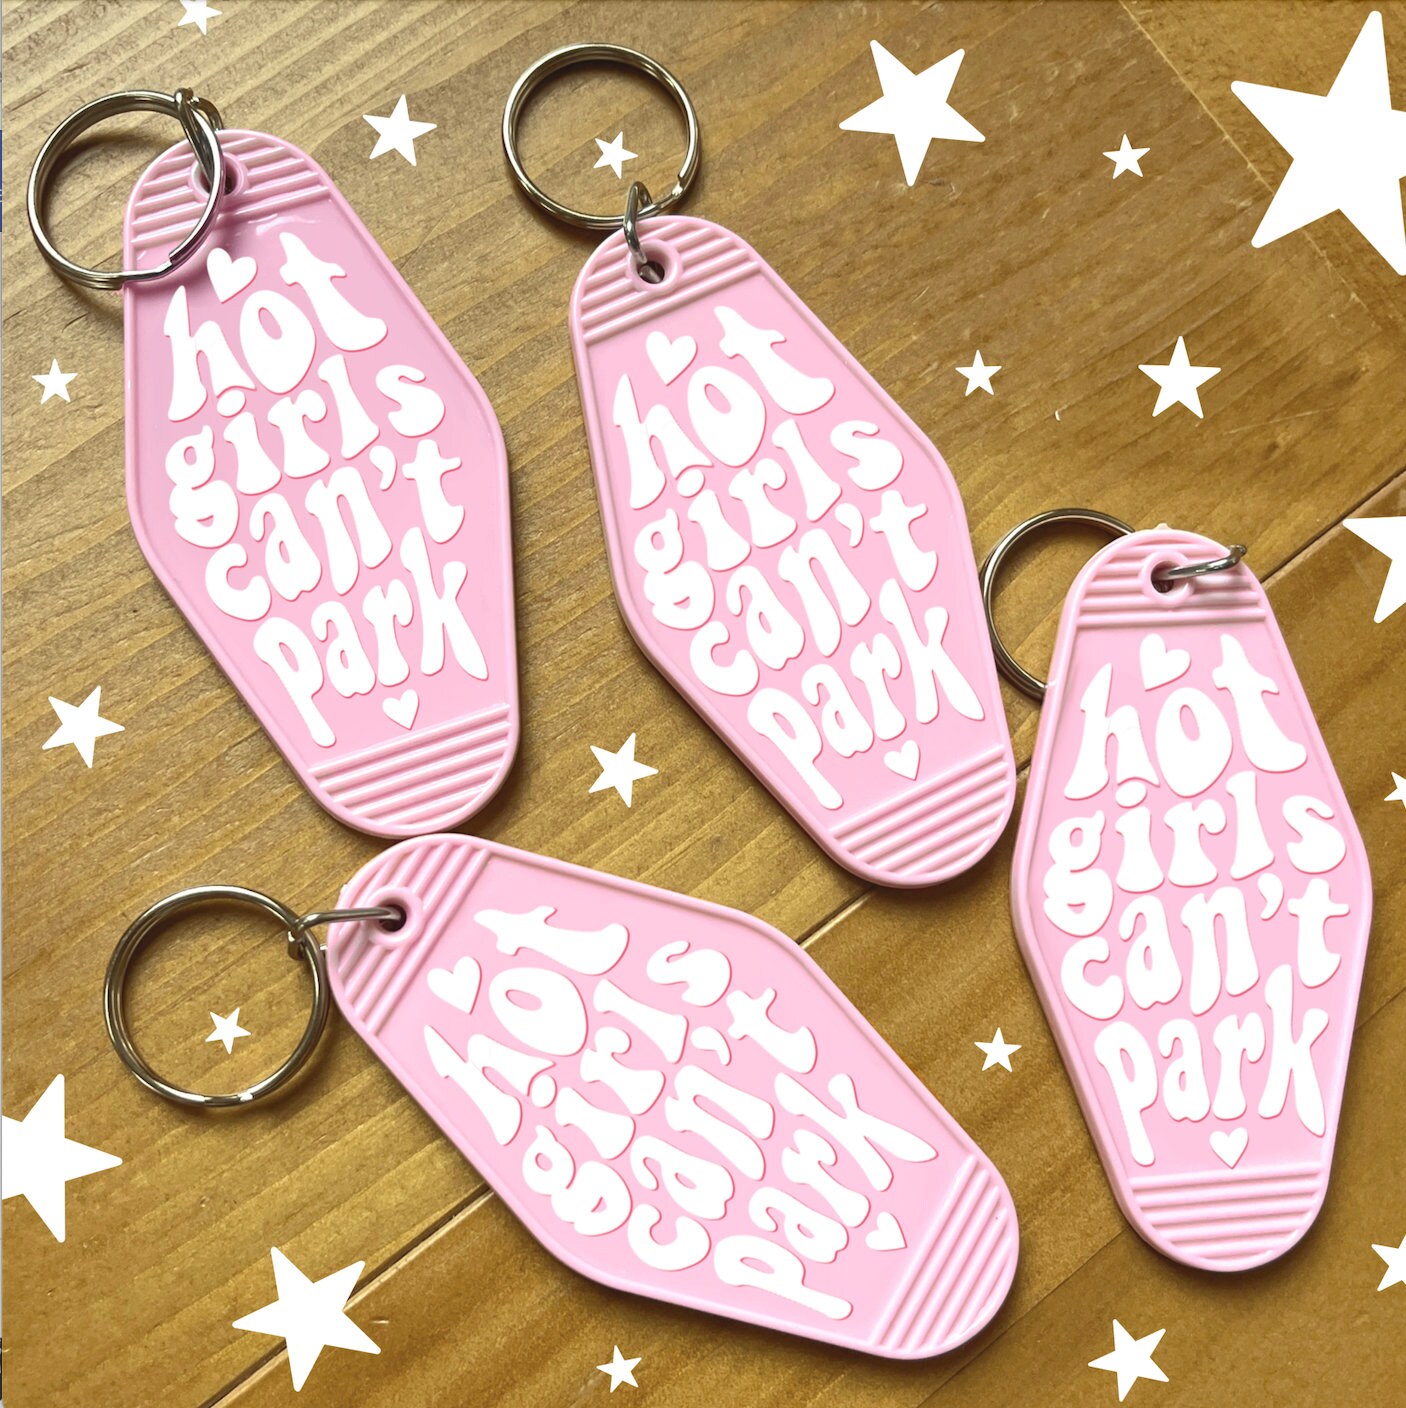 Hot Girls Can't Park Keychain | Pink Motel Style Keychains, Passed Driving Test, Driving Test Gift, First Car Gift, Car Gift